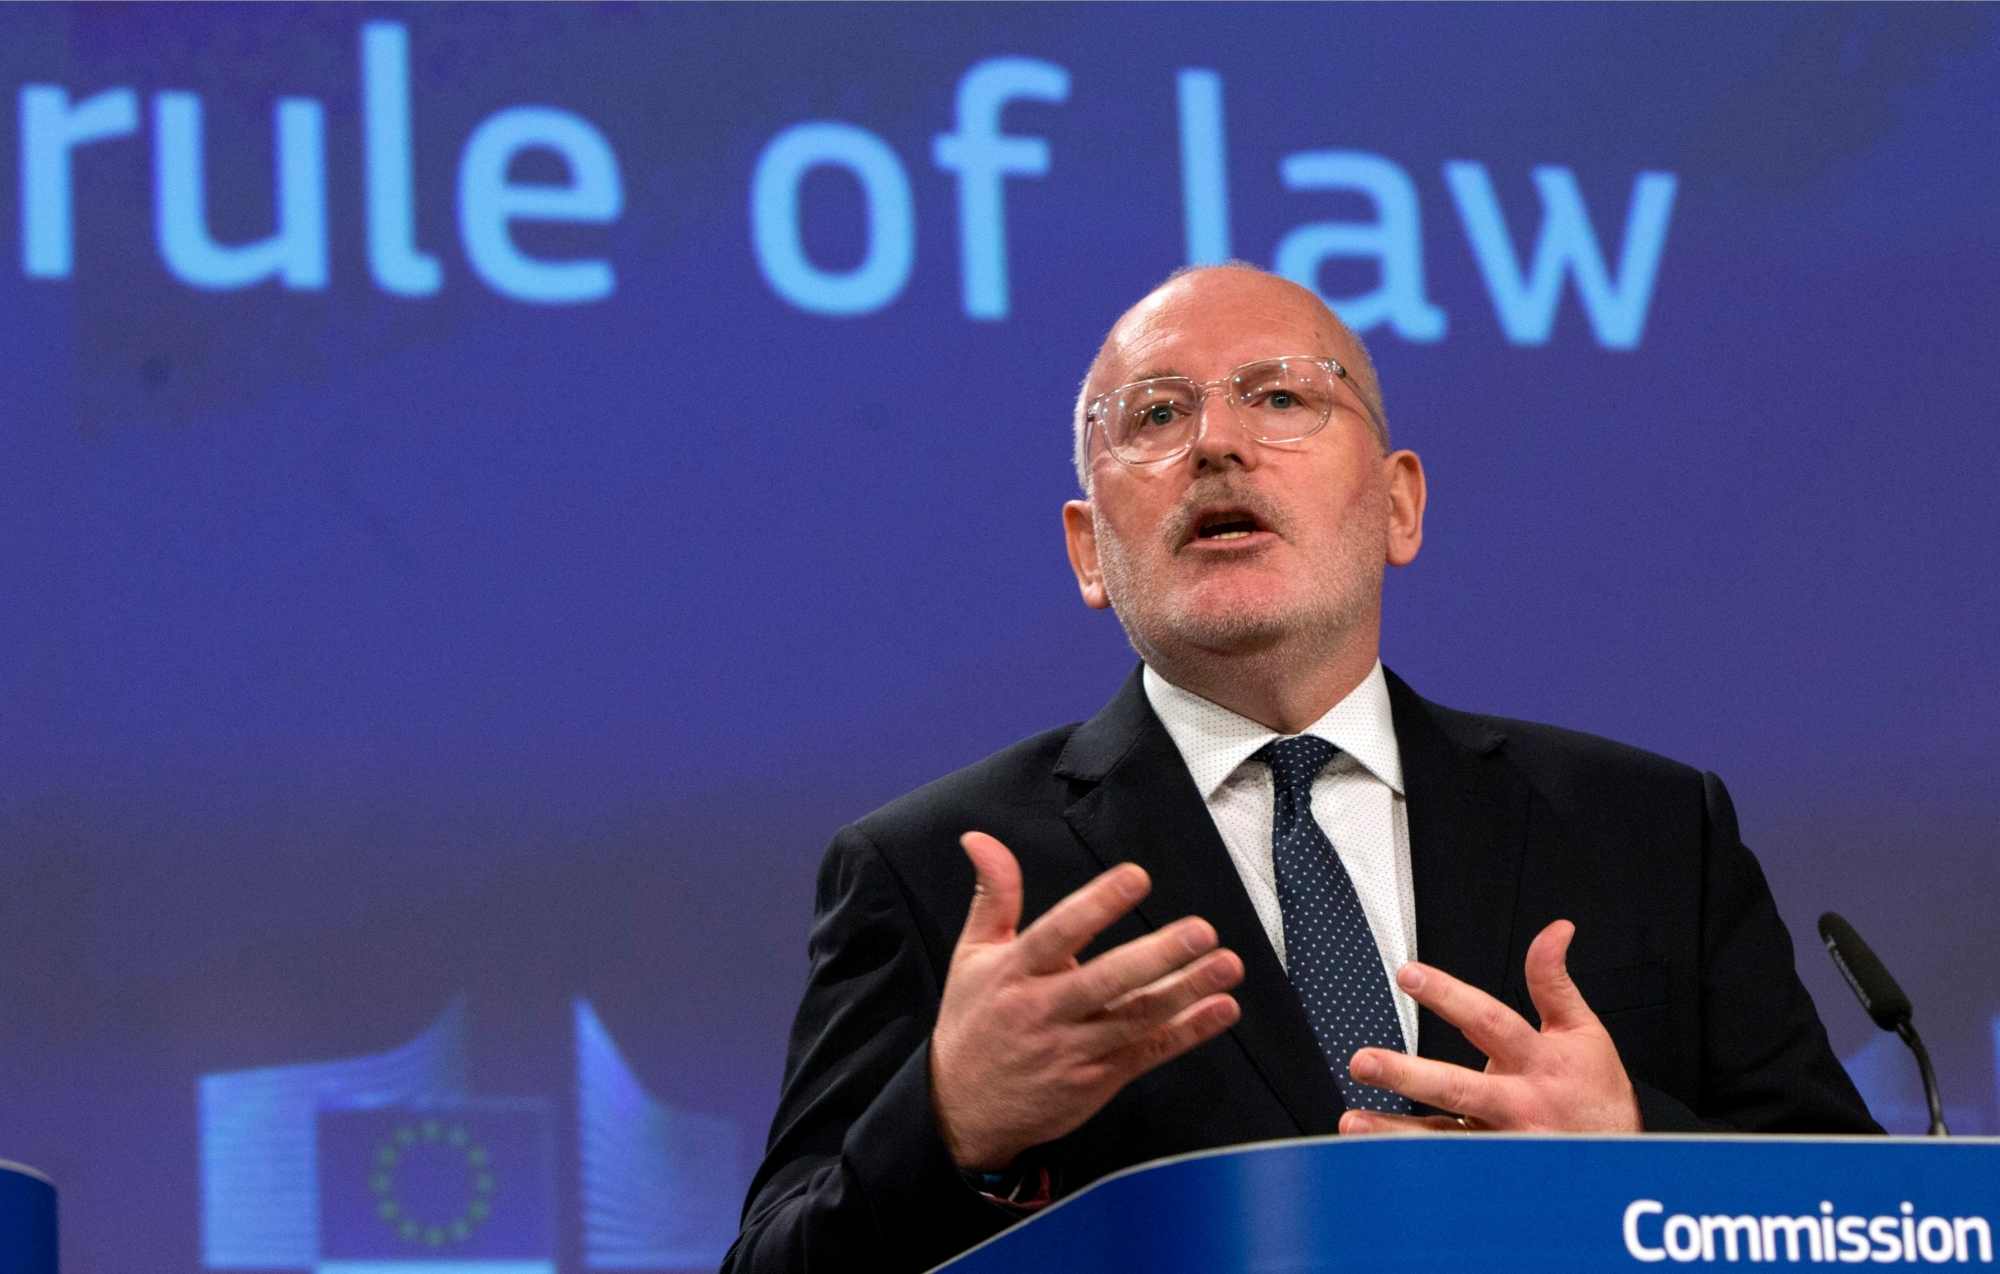 European Commission Vice-President Frans Timmermans speaks during a media conference on strengthening the rule of law at EU headquarters in Brussels, Wednesday, April 3, 2019. The European Union is launching action against Poland over allegations that recent justice laws introduced by the government undermine the independence of judges. (AP Photo/Virginia Mayo) Belgium EU Poland